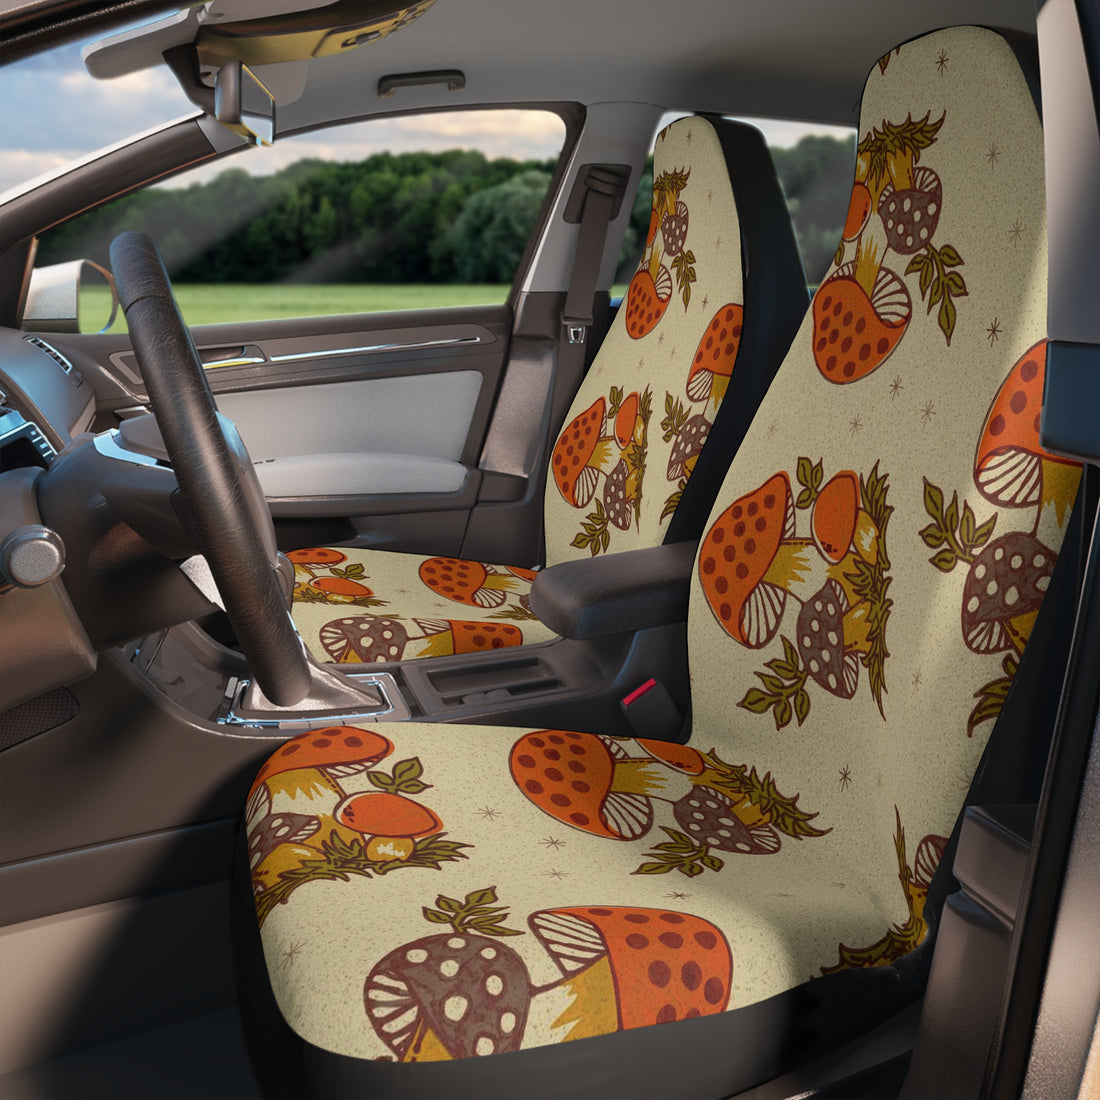 60s 70s Merry Mushroom Retro Car Seat Covers, Orange Brown Groovy Hippie, Hipster Car Accessories